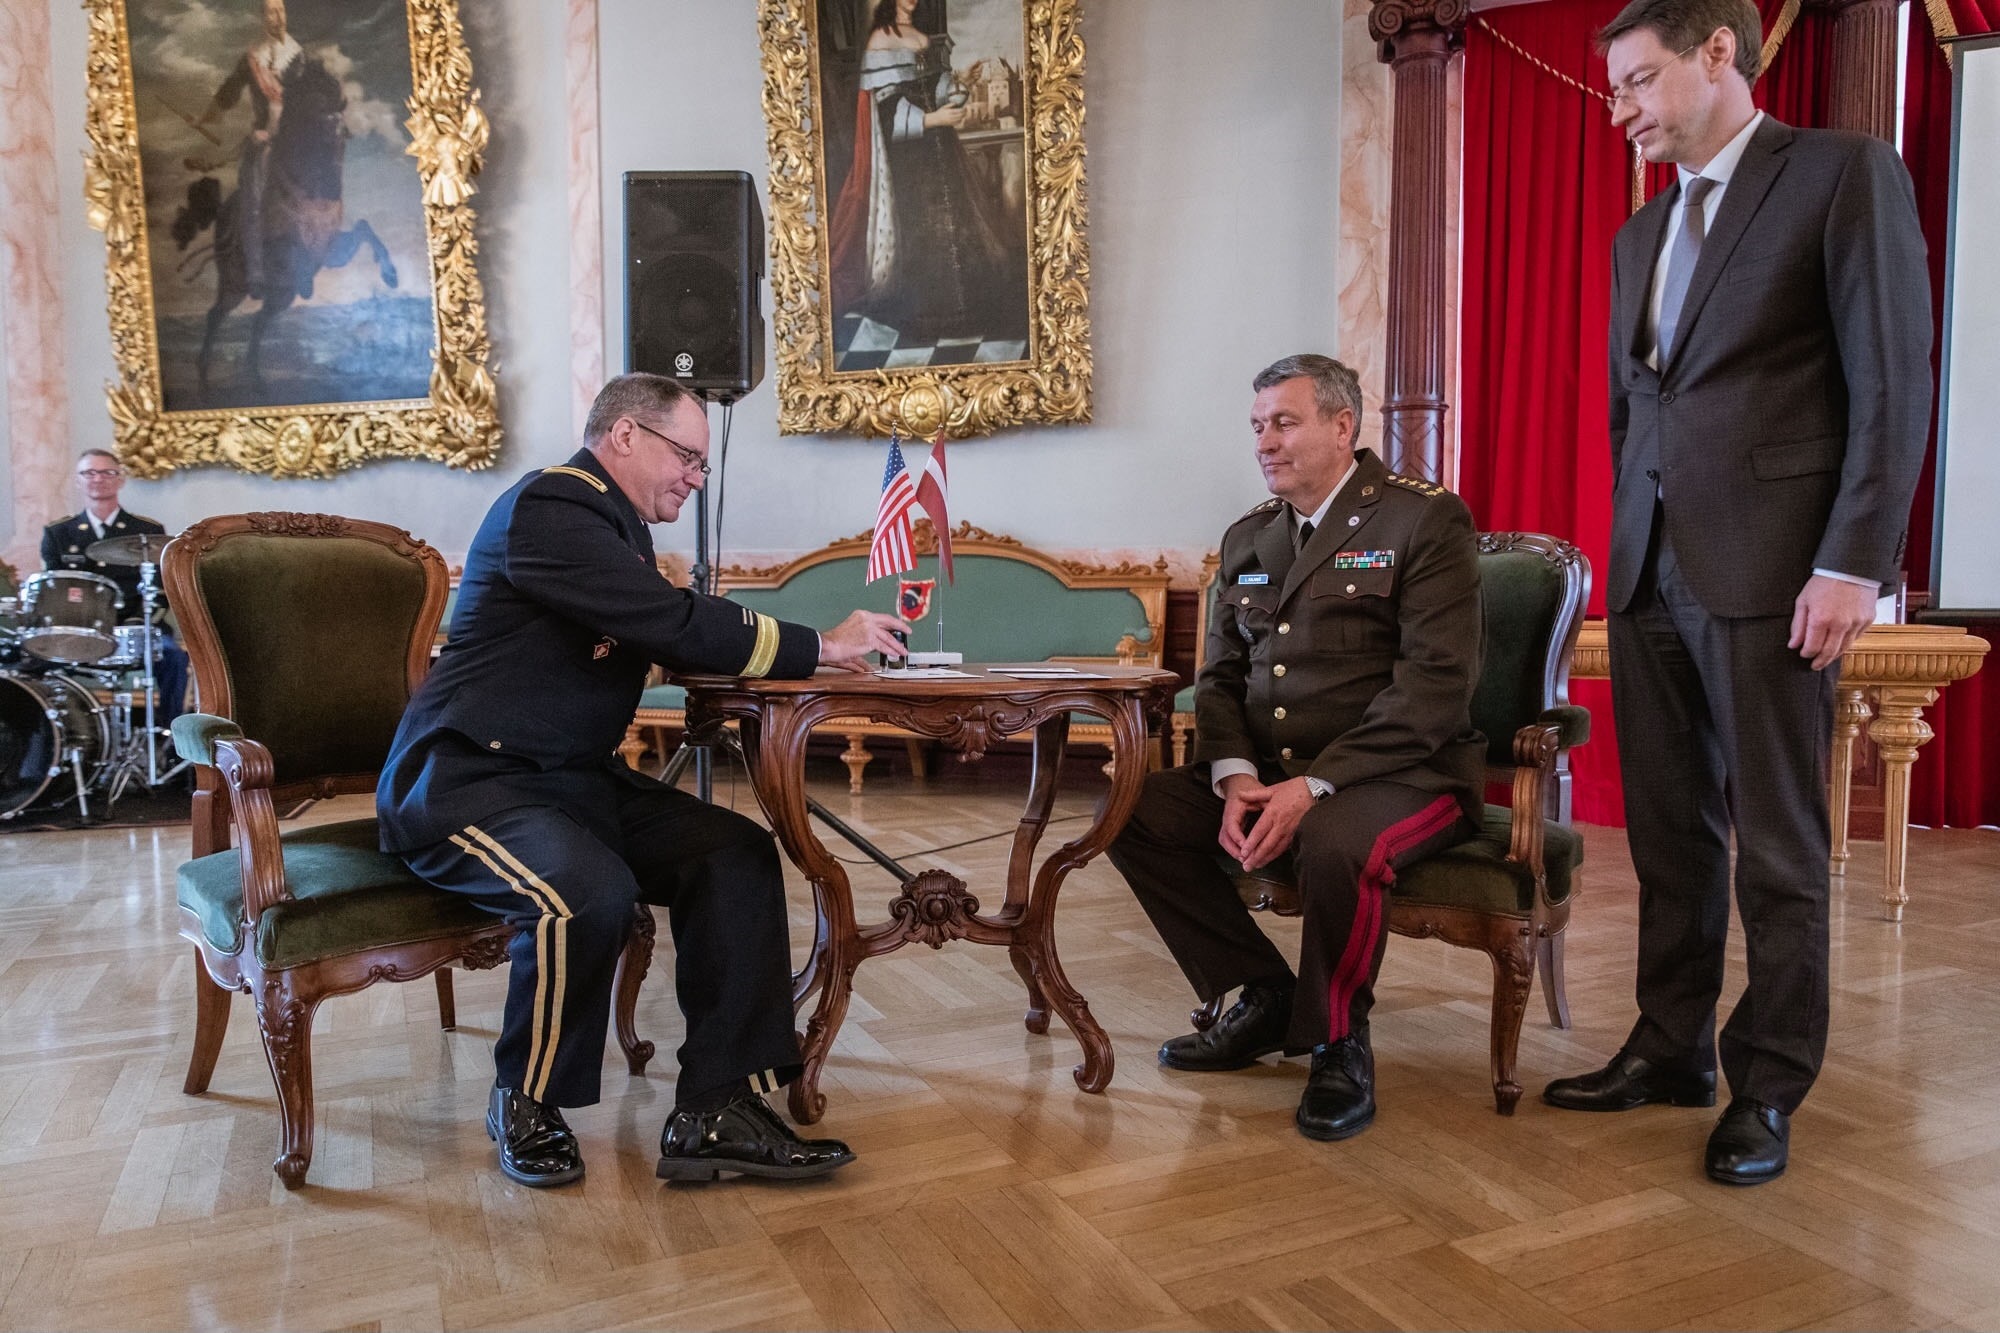 U.S. Army Maj. Gen. Paul Rogers, adjutant general of the Michigan National Guard, Lt. Gen. Leonīds Kalniņš, Latvian chief of defense, and Mārcis Vilcāns, chairman of the board for Latvia Post, perform a stamp canceling ceremony May 3, 2023, in Riga, Latvia, at an event honoring the 30th anniversary of Latvia’s defense cooperation with the Michigan National Guard under the State Partnership Program. The SPP has been instrumental in developing Latvia's defense capabilities